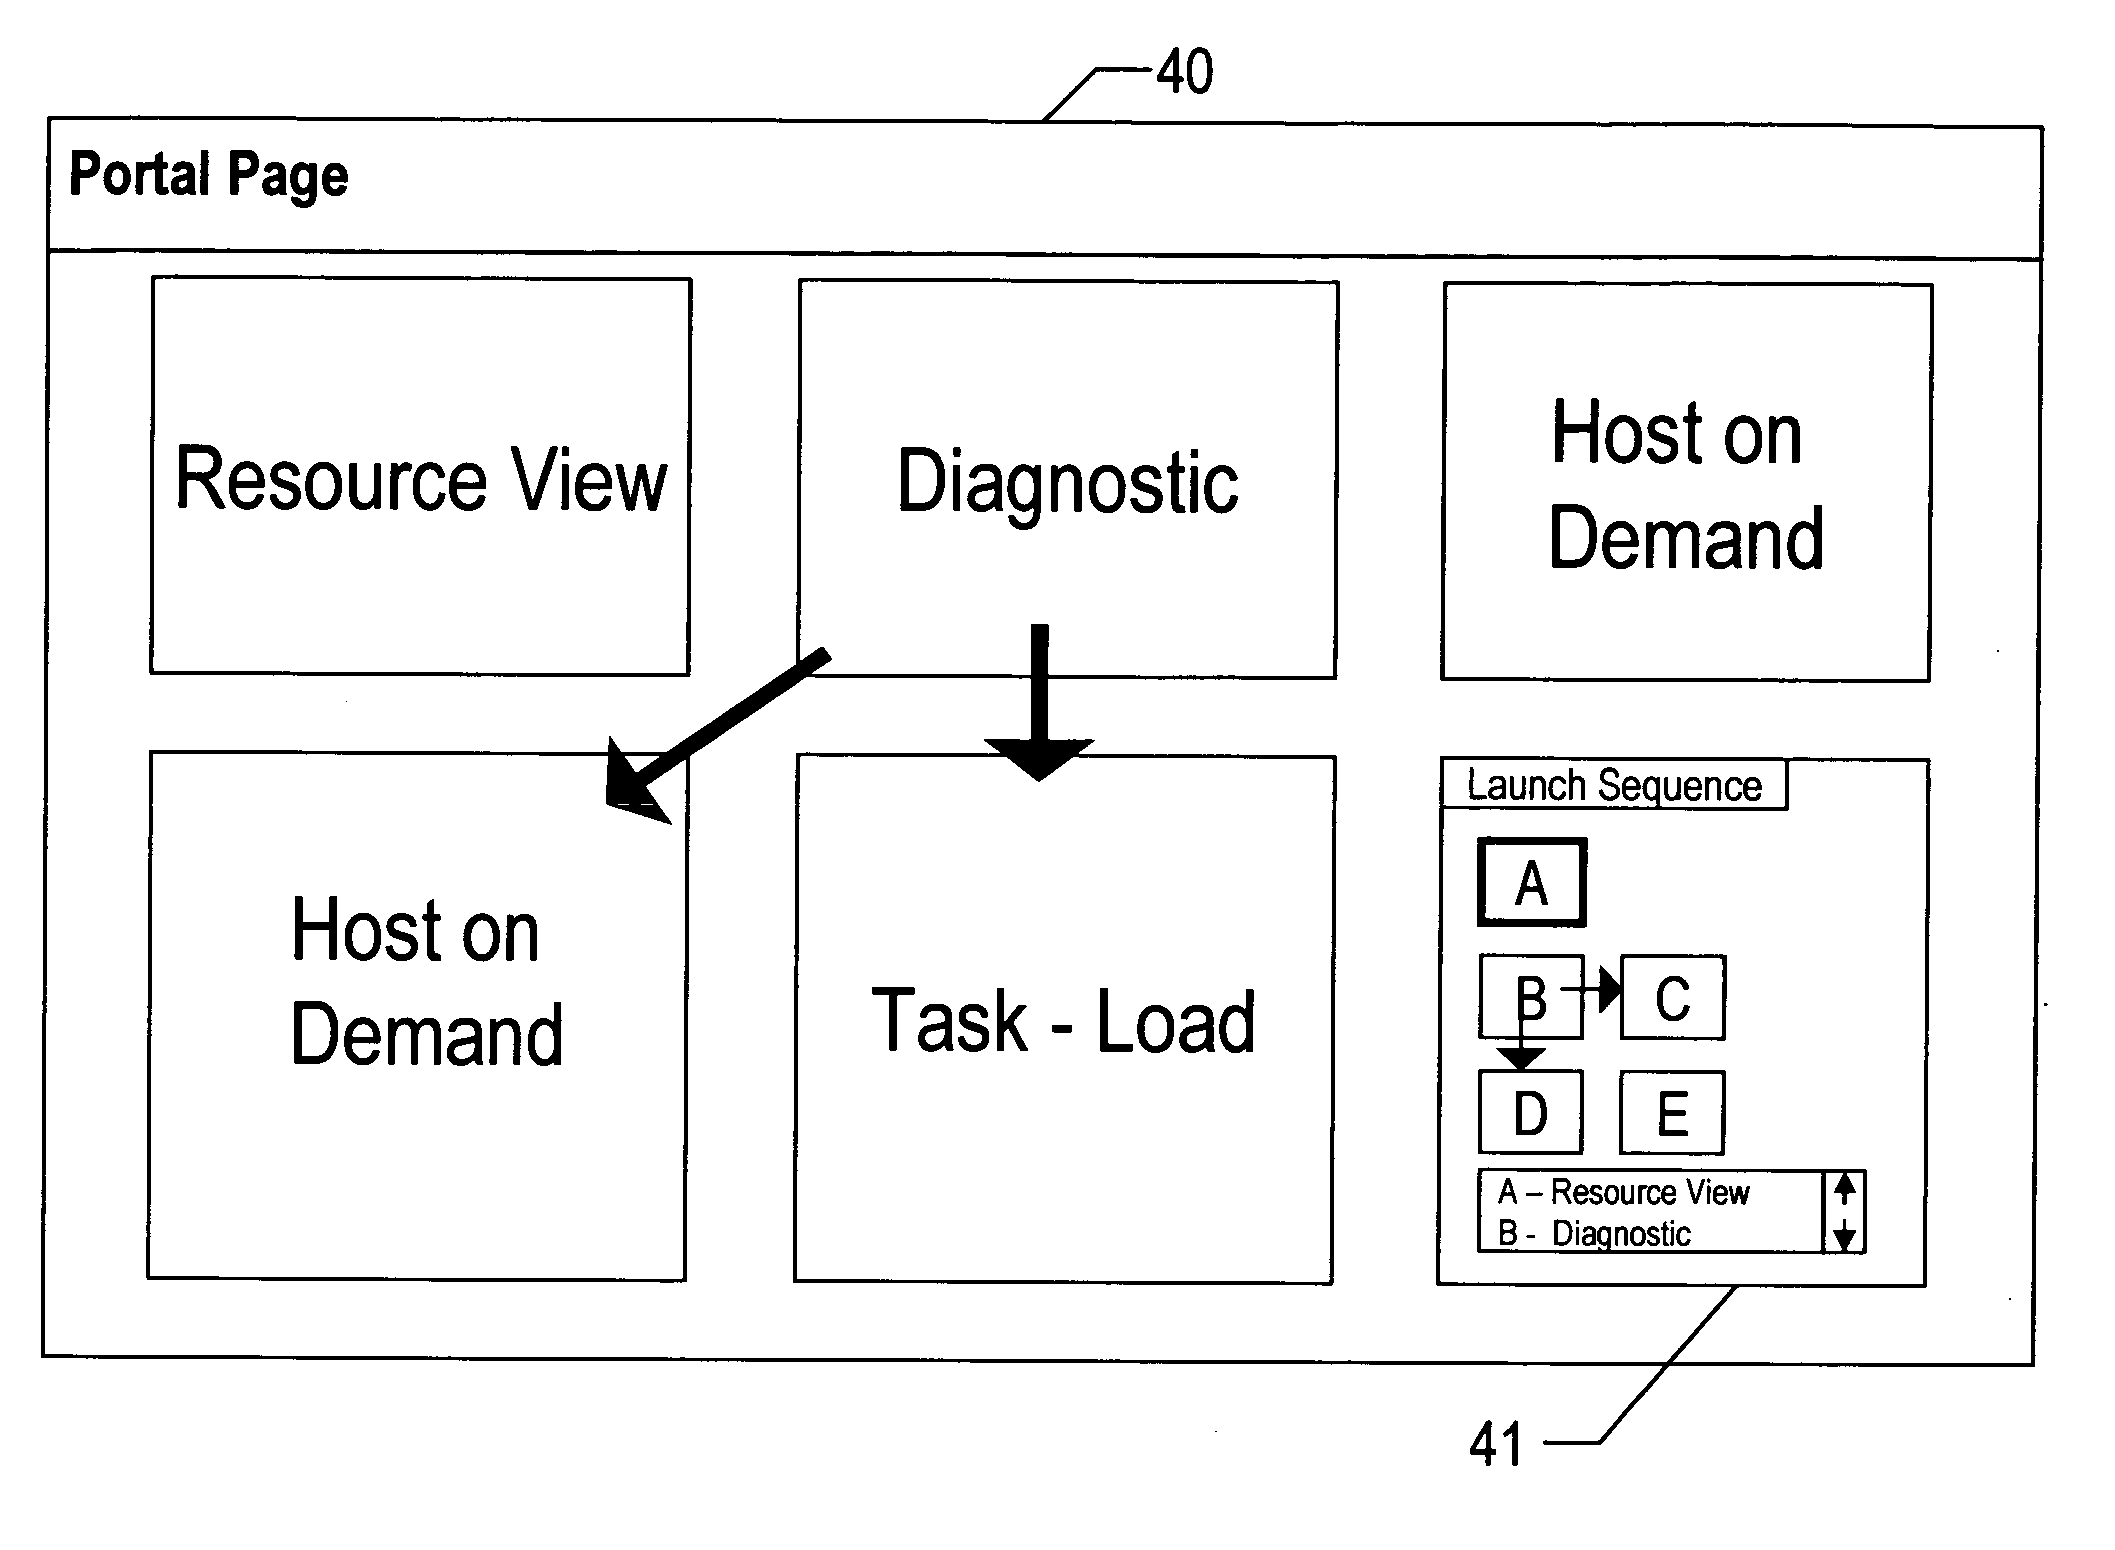 Method for the display of visual sequencing of message communications between application portlets and task page relationship information in a web-base environment